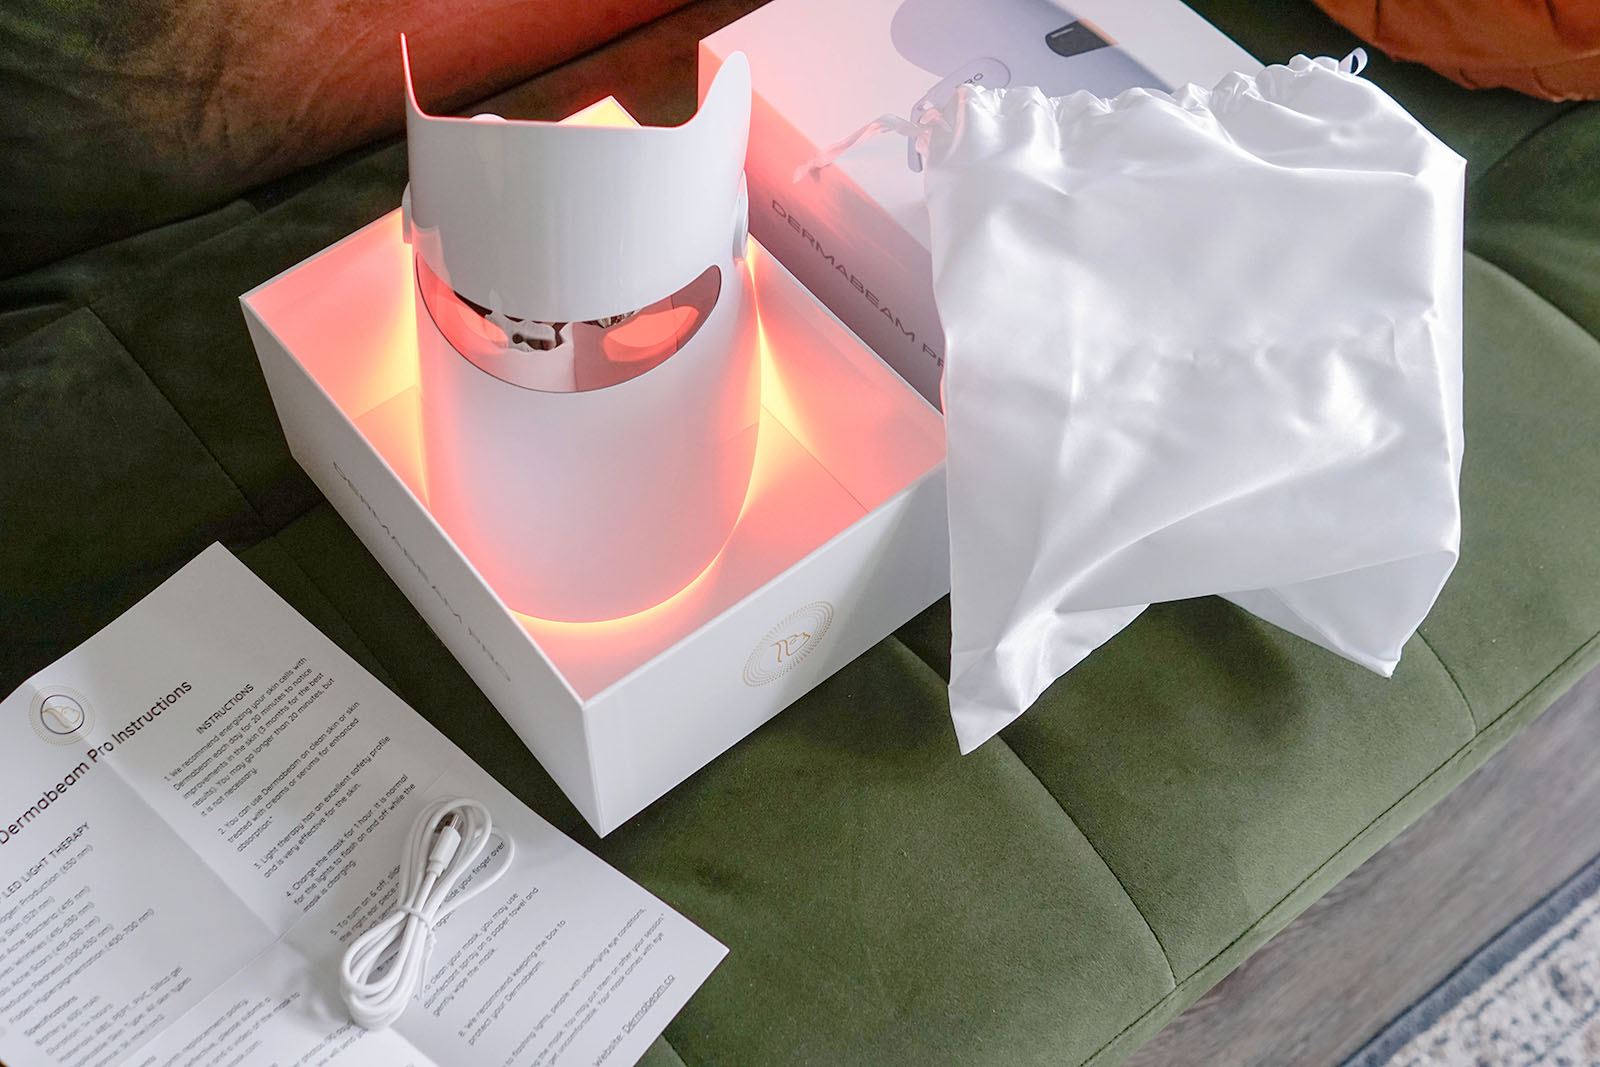 What's in the box of the Dermabeam Pro Light Therapy Mask?